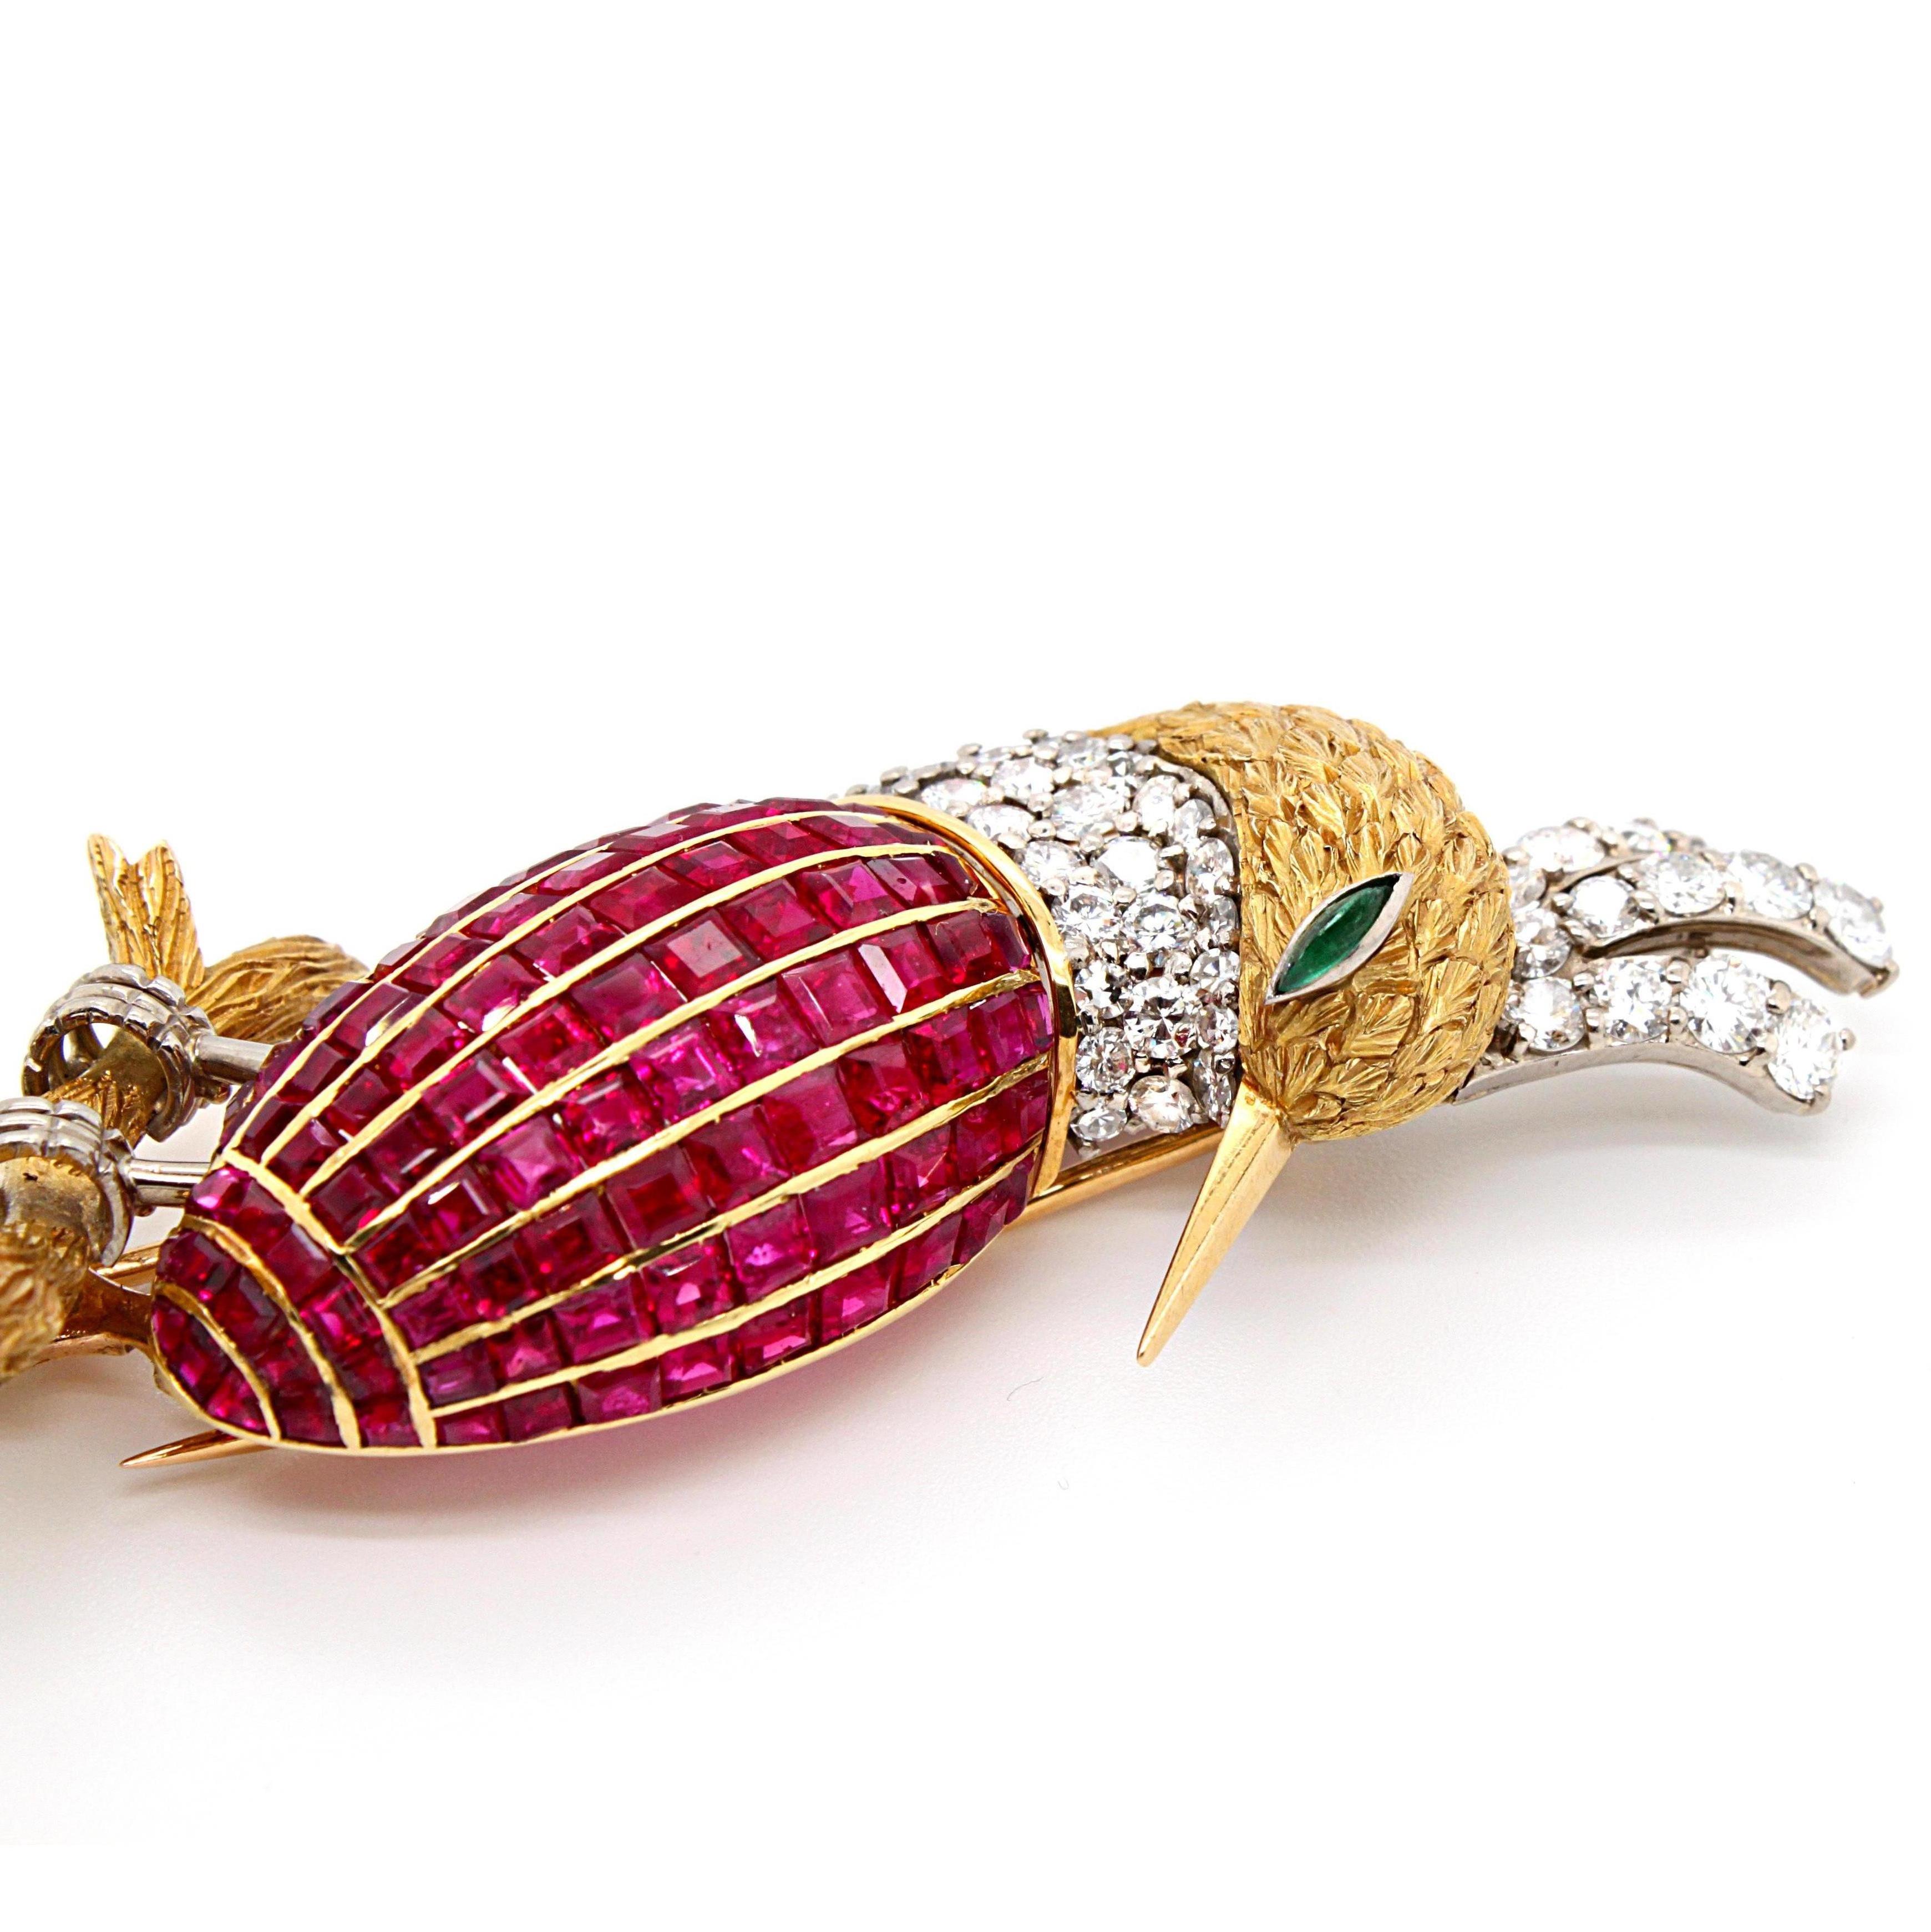 A ruby, emerald and diamond bird of paradise brooch in 18k yellow and white gold, France, ca. 1960s. 

The bird has a beautifully striking and strong design. It's crown, feathers and neck are set with round brilliant cut diamonds as well as ruby